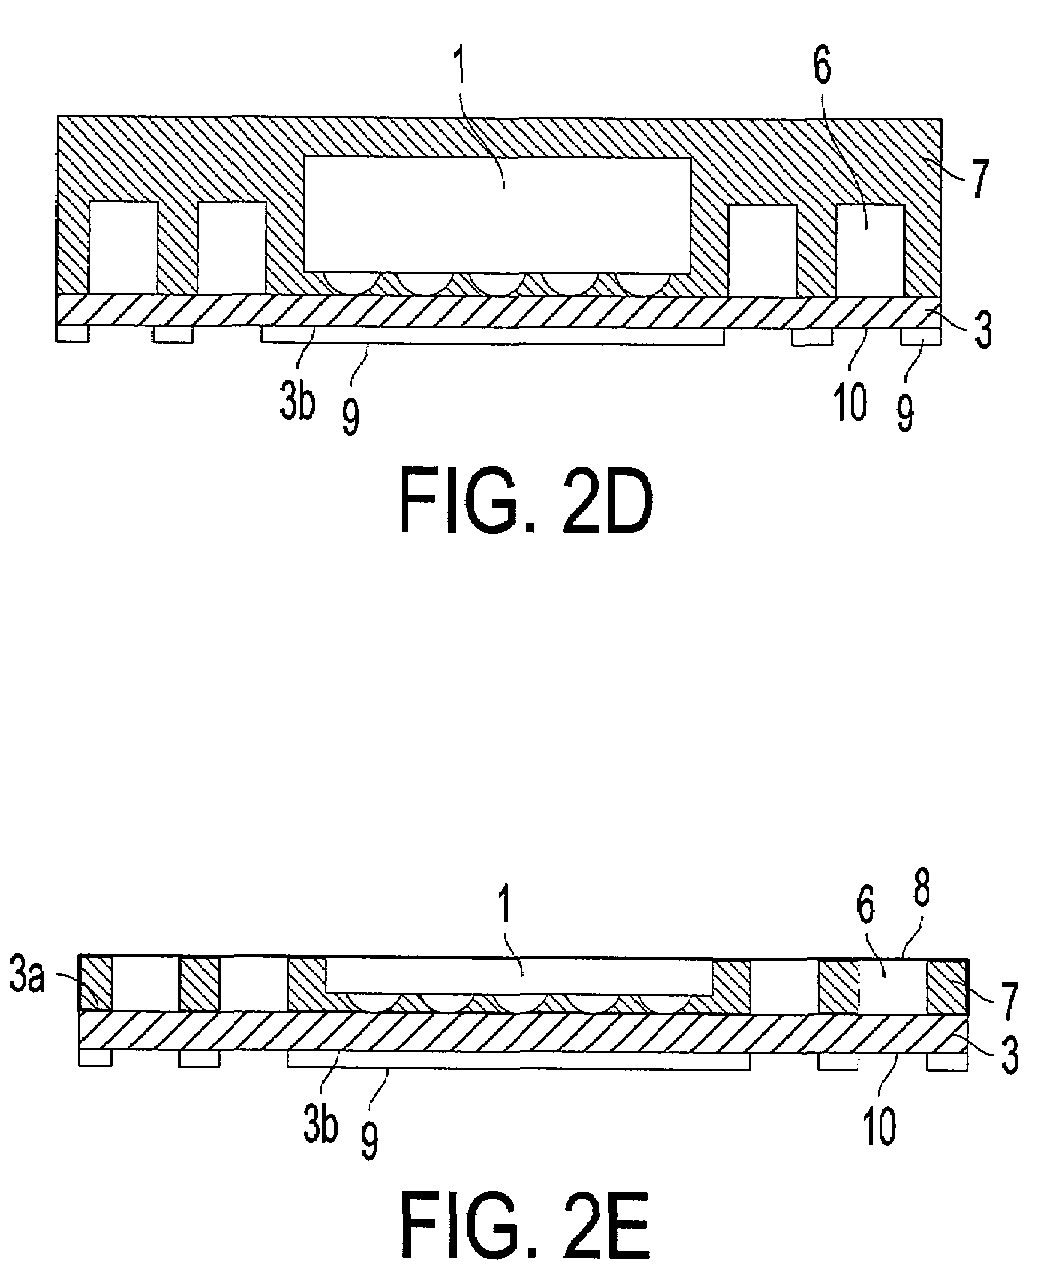 Thin planar semiconductor device having electrodes on both surfaces and method of fabricating same